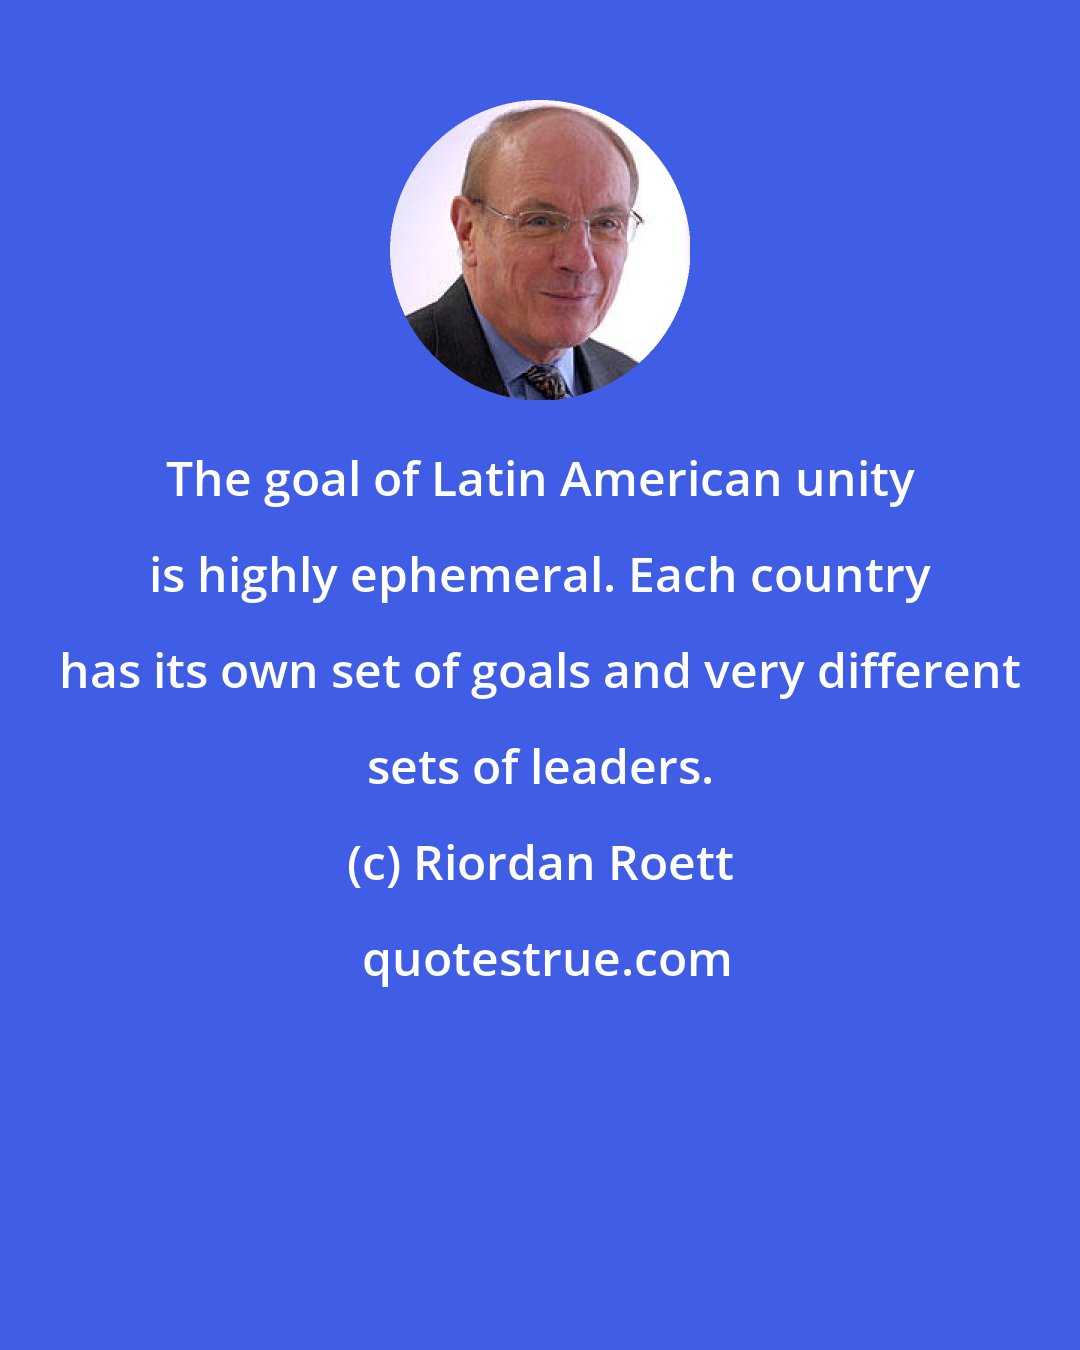 Riordan Roett: The goal of Latin American unity is highly ephemeral. Each country has its own set of goals and very different sets of leaders.